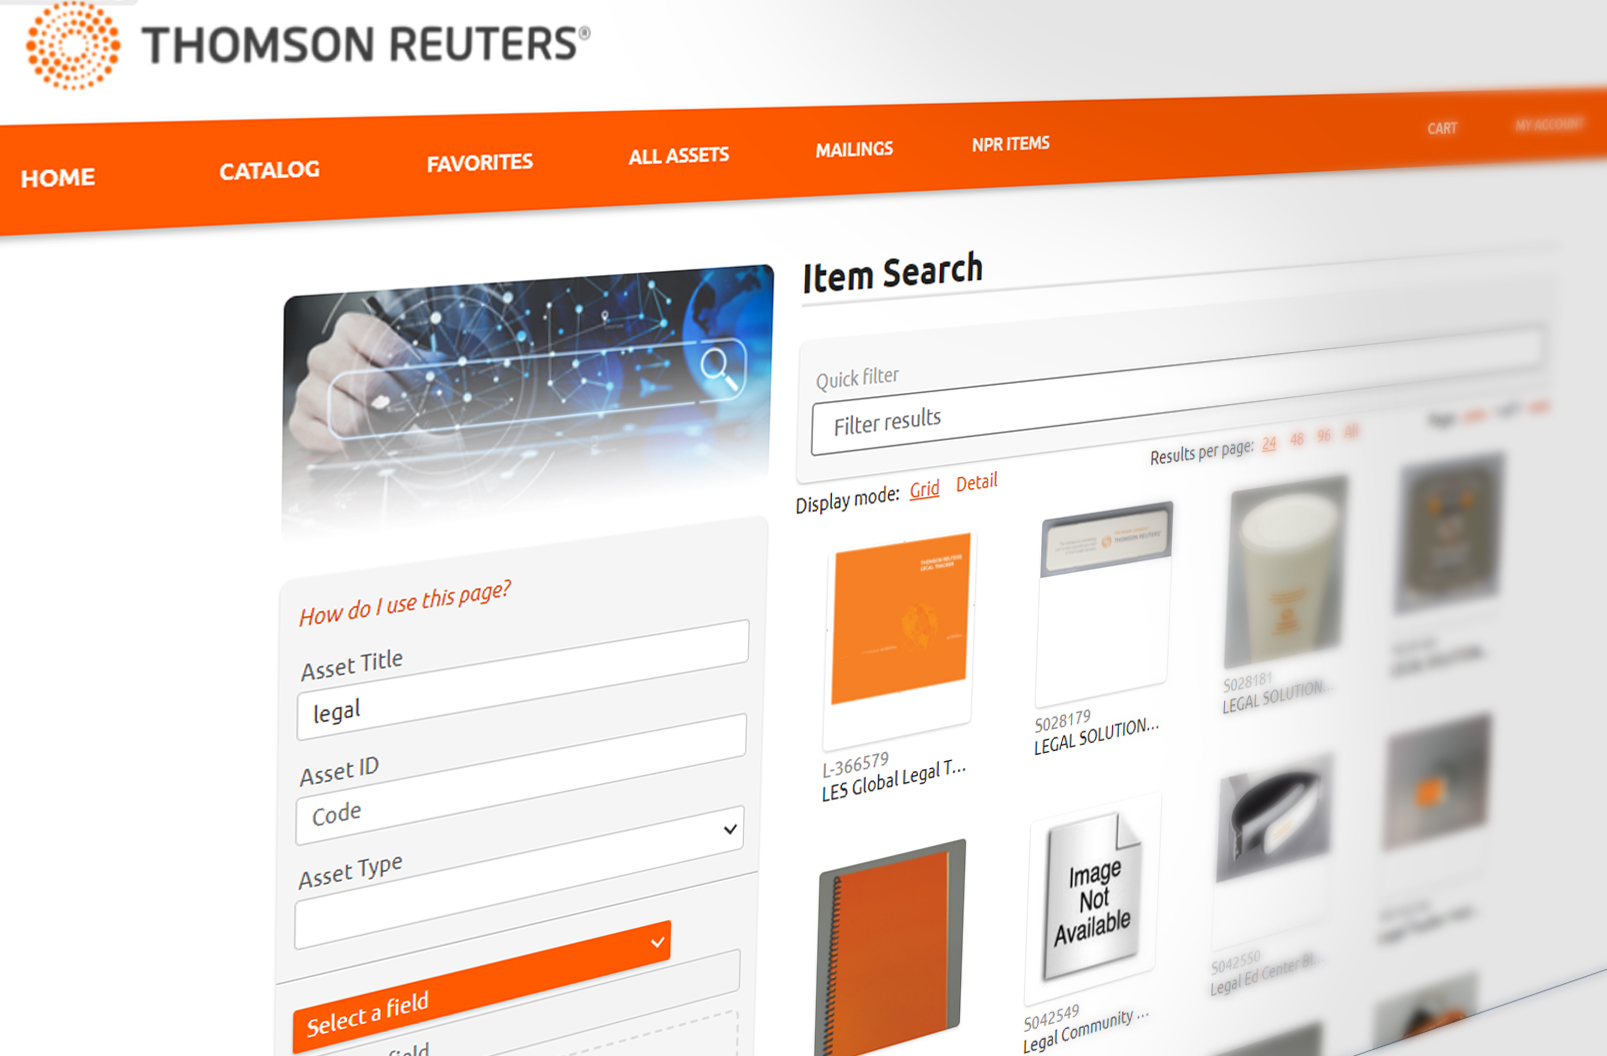 SmartQ workflow interface for thomson reuters